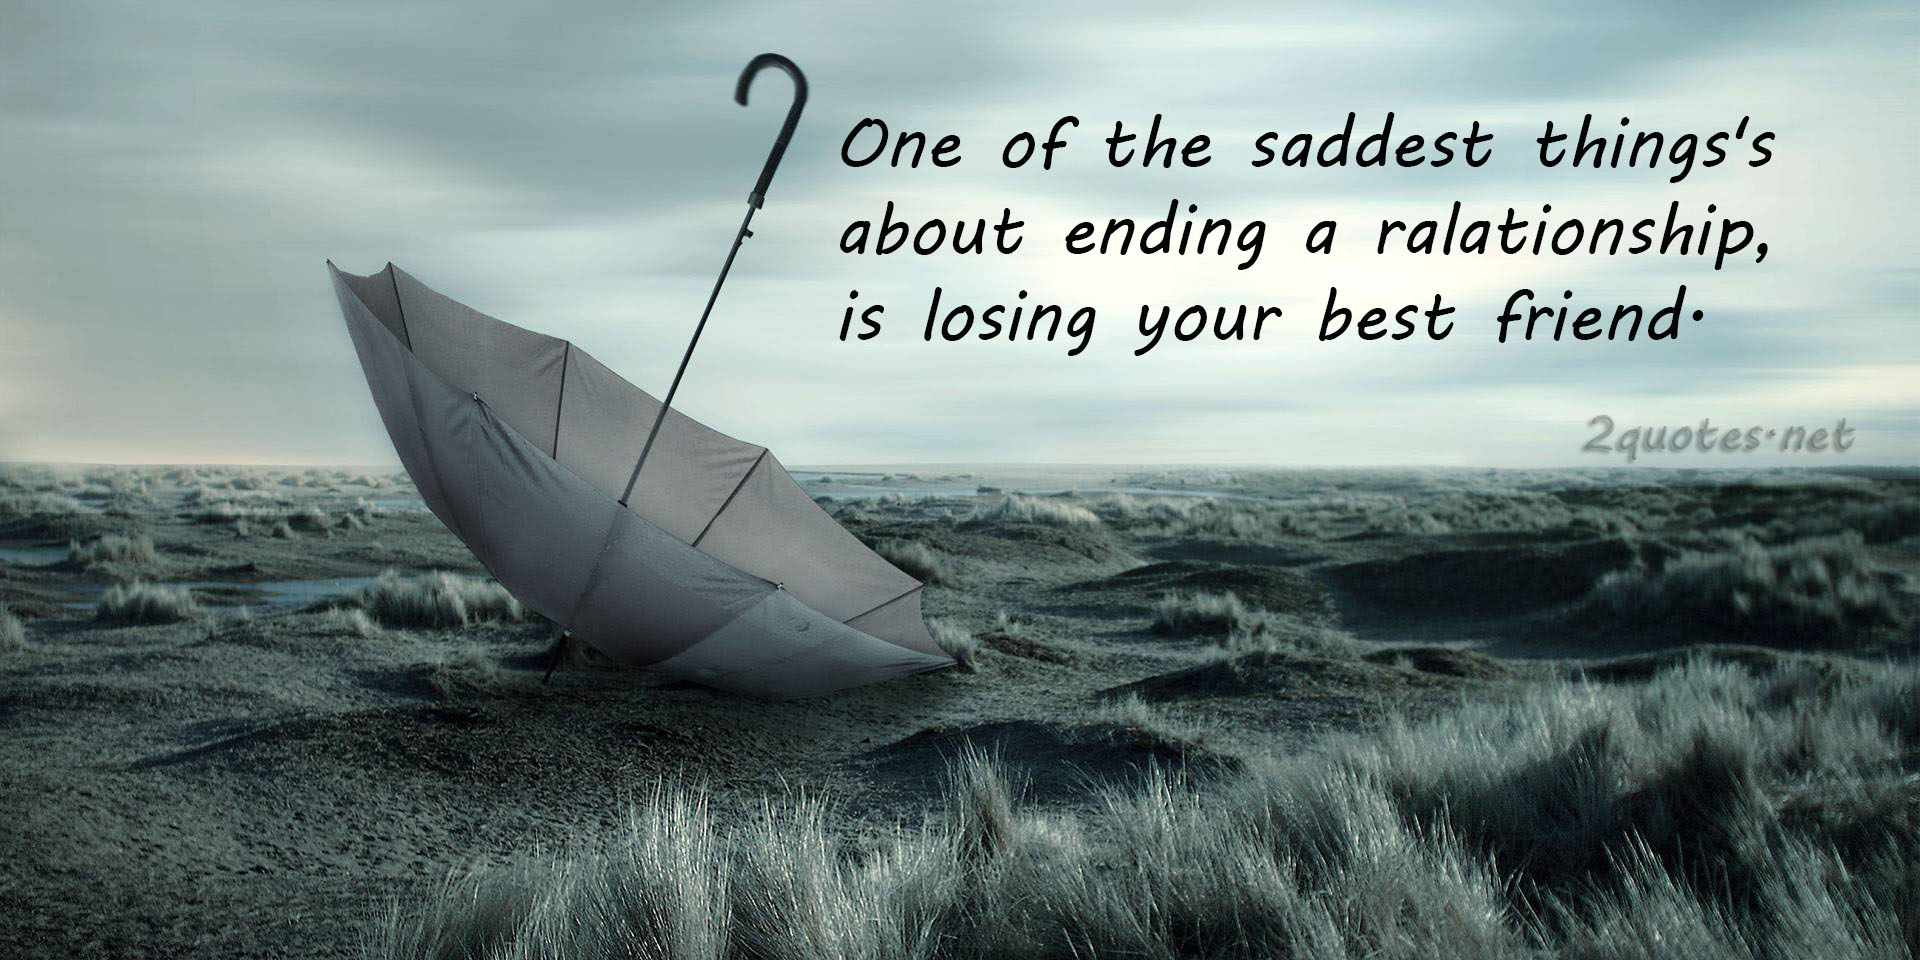 Sad Quotes About Losing Your Best Friend